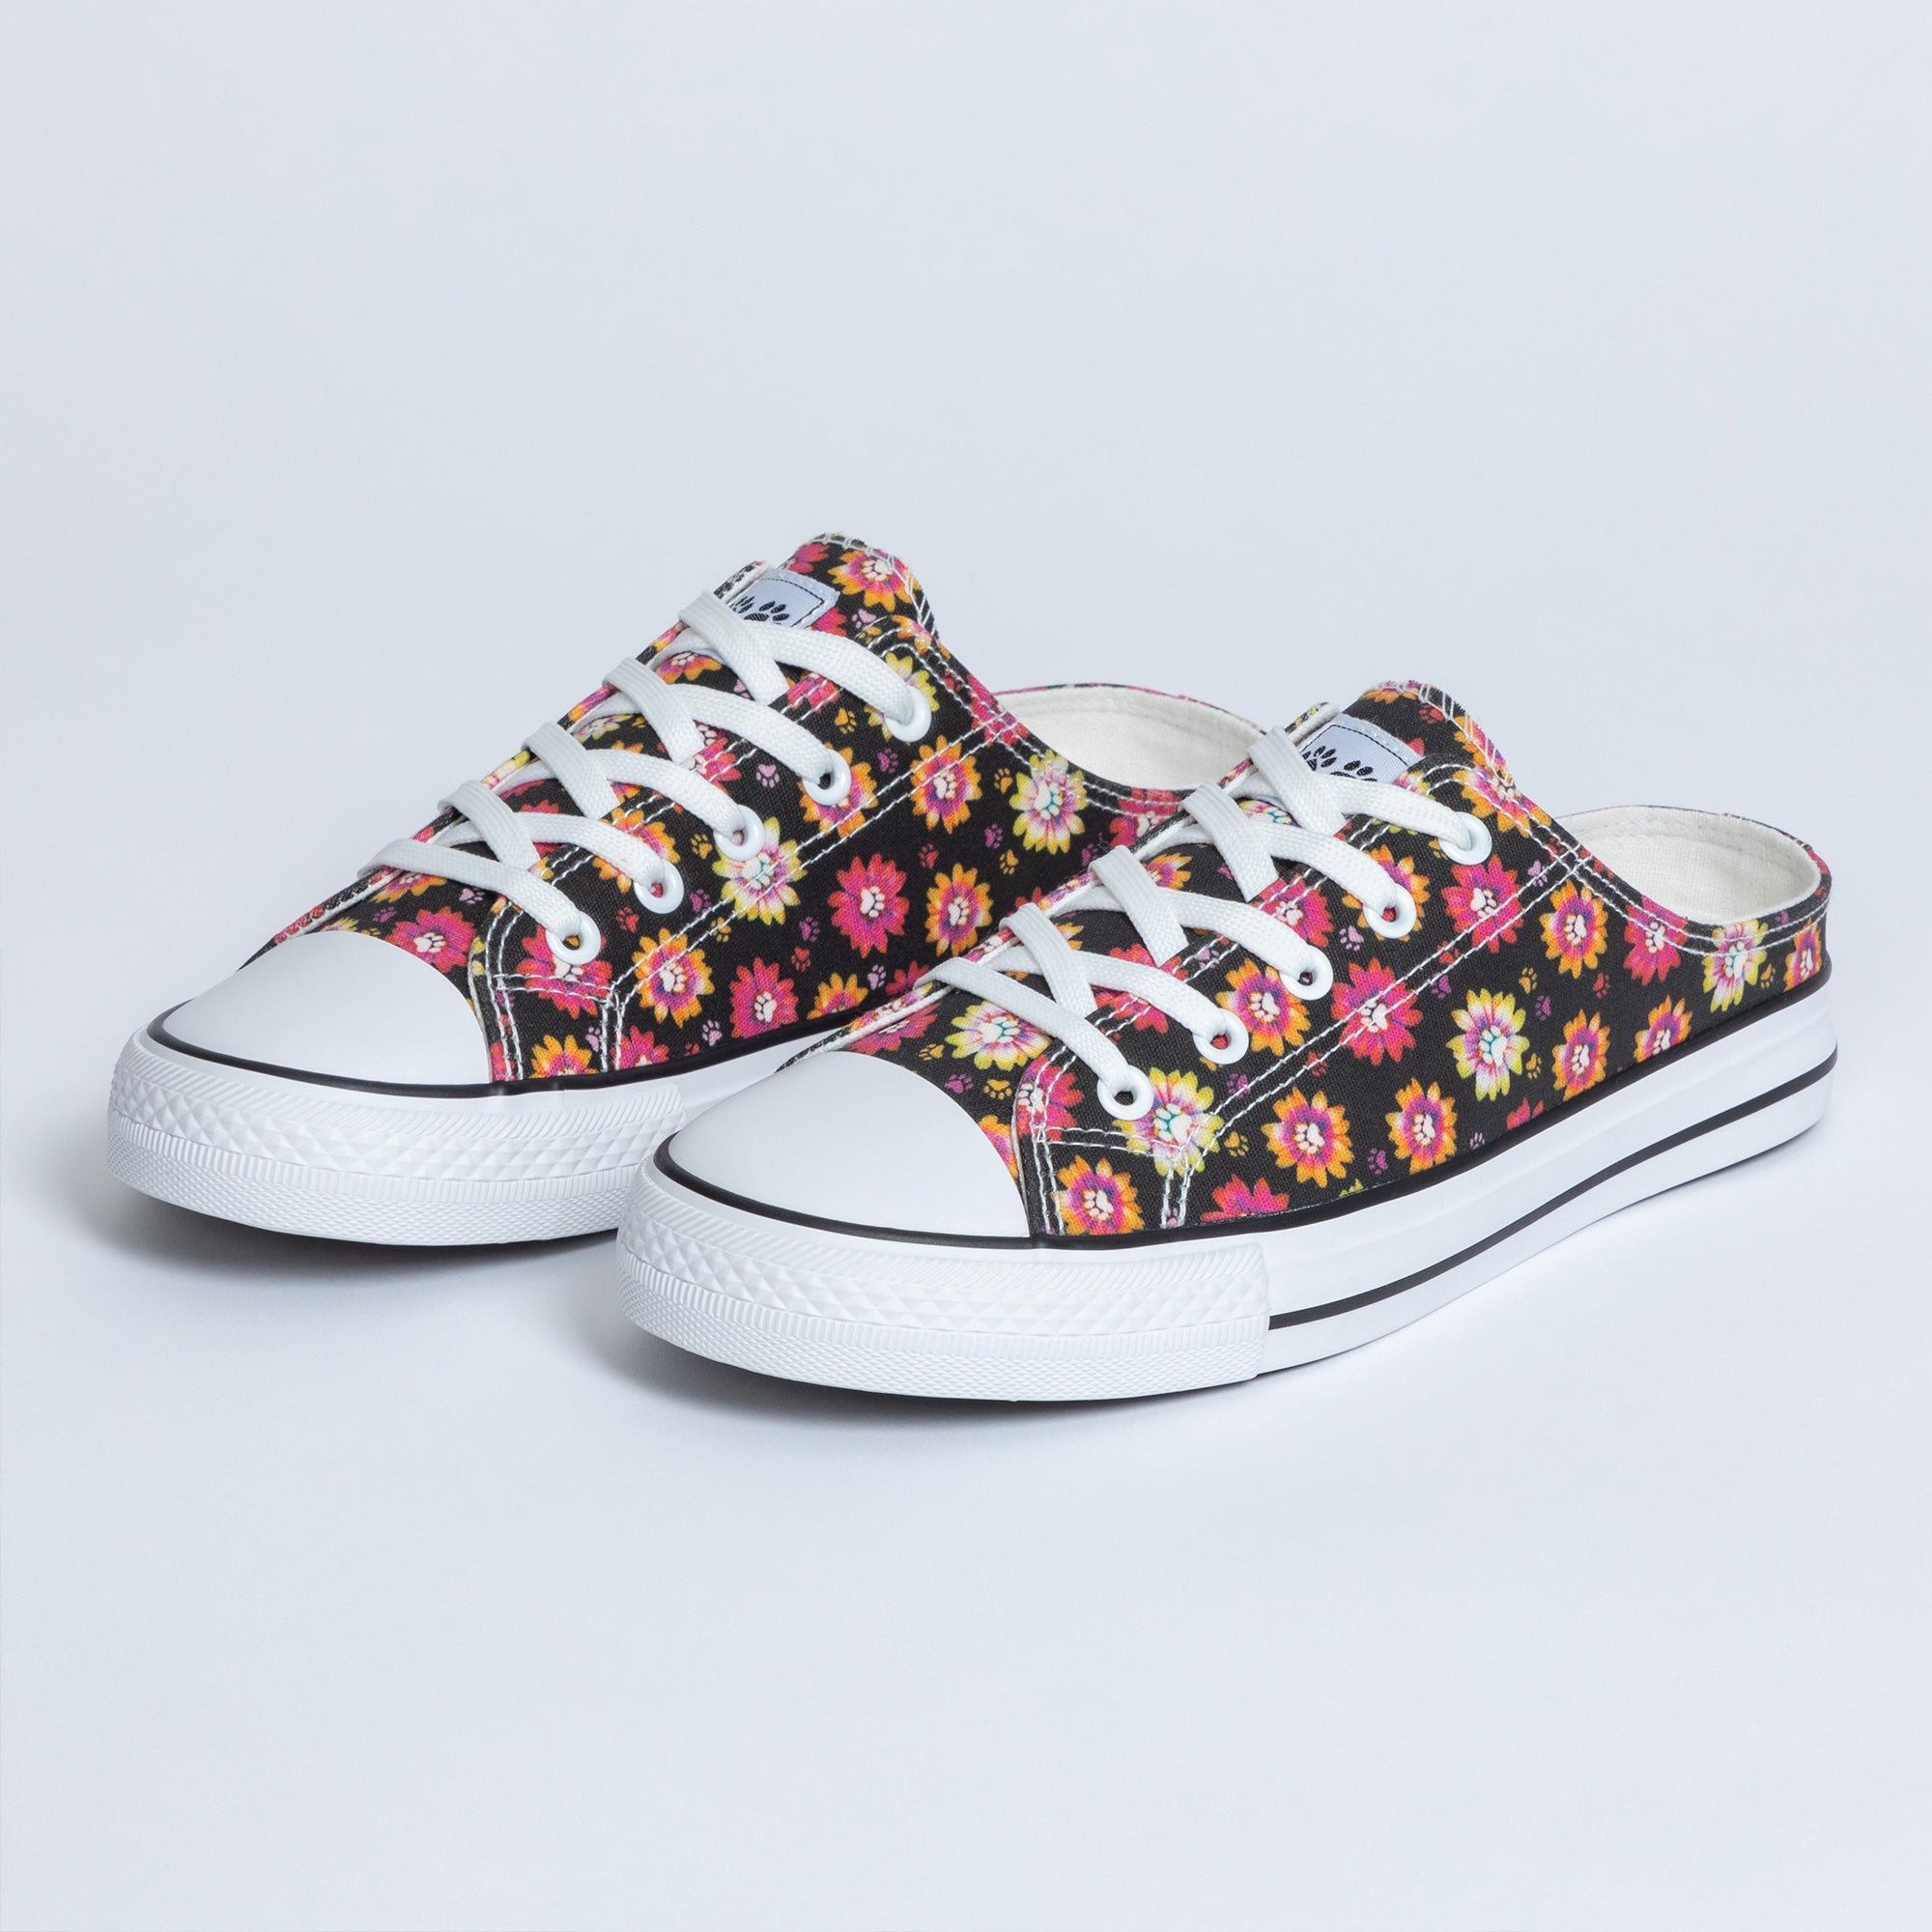 Paw Print Canvas Slip-On Sneakers - Pretty Paw Daisies - 10